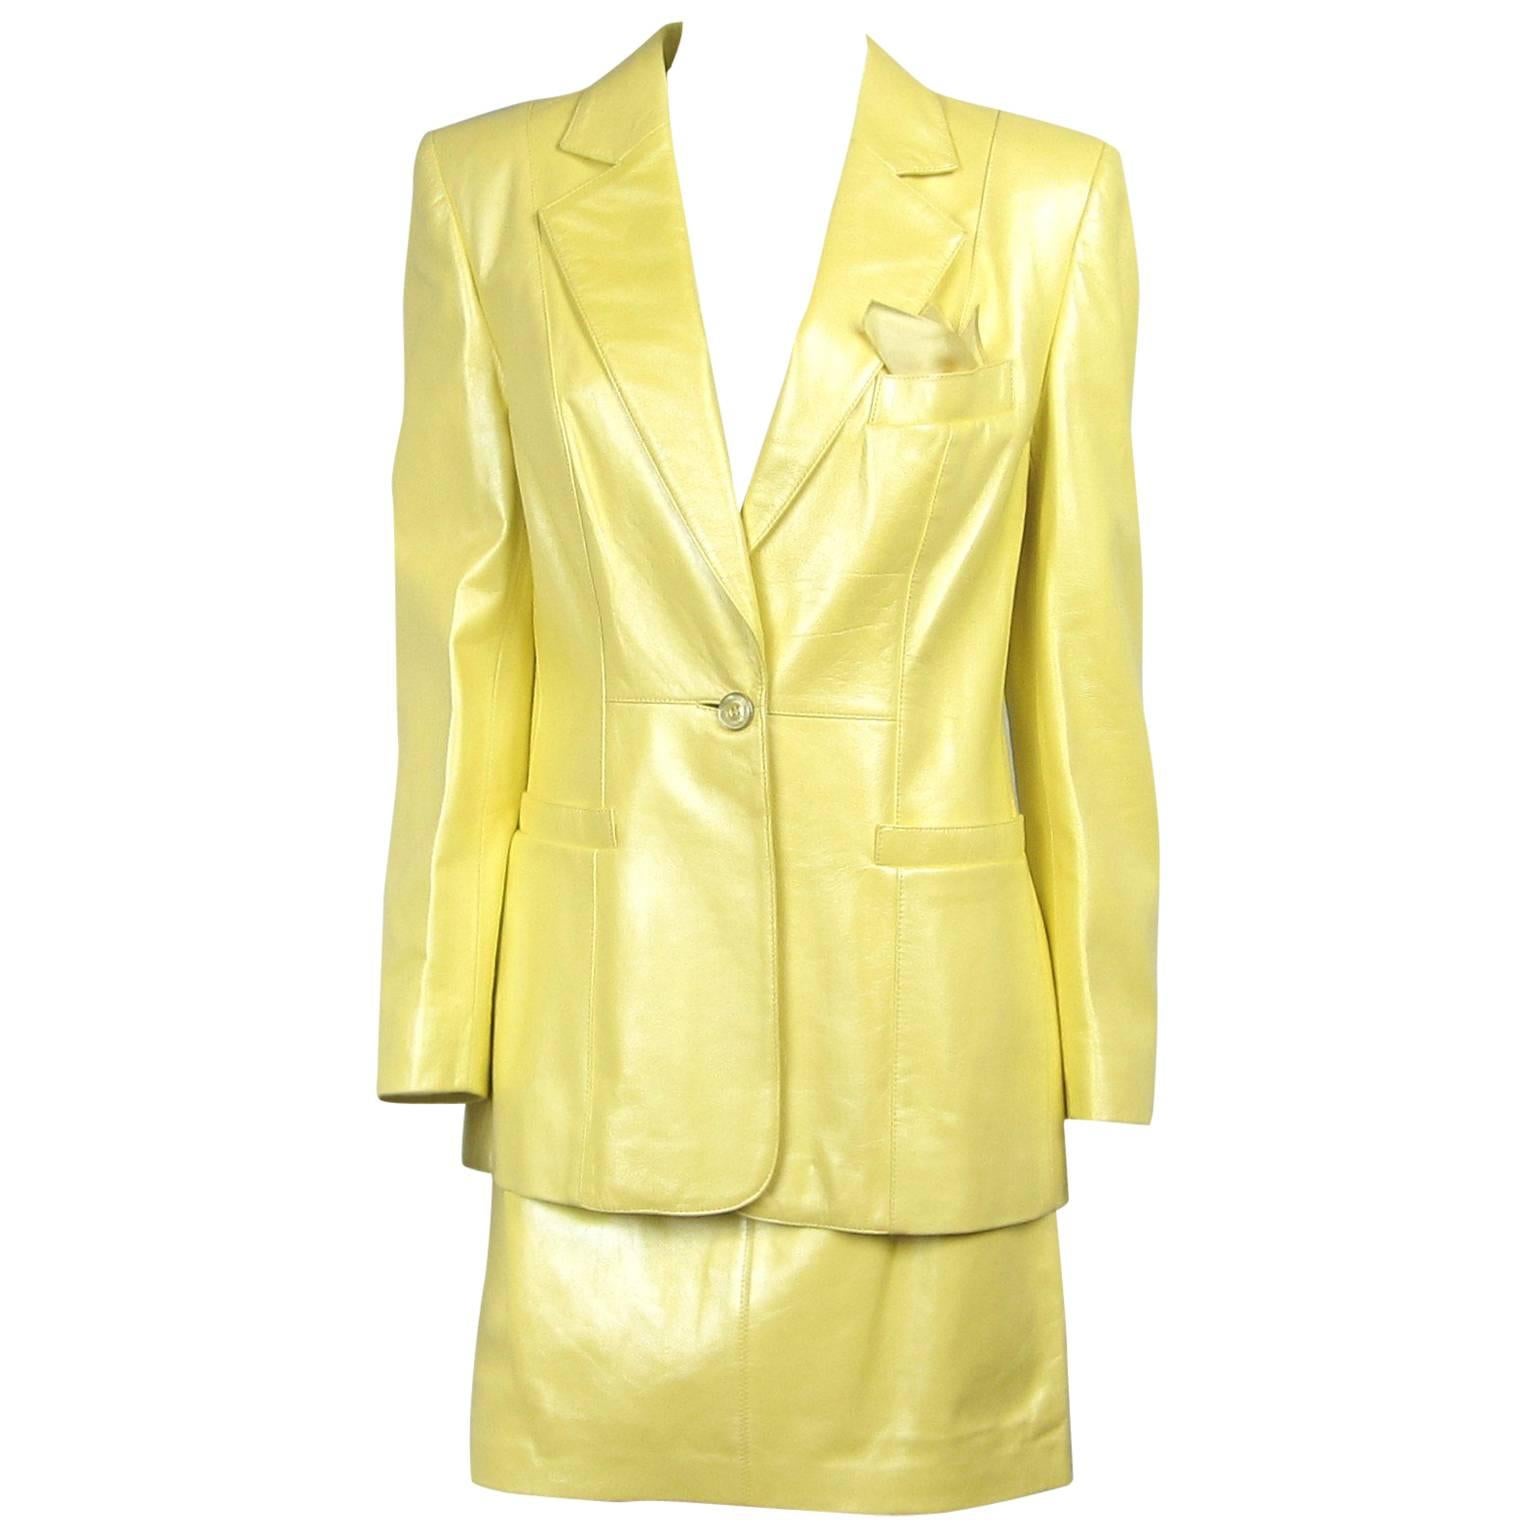 1990s ESCADA Pearl YELLOW Leather JACKET & SKIRT New, Never Worn 